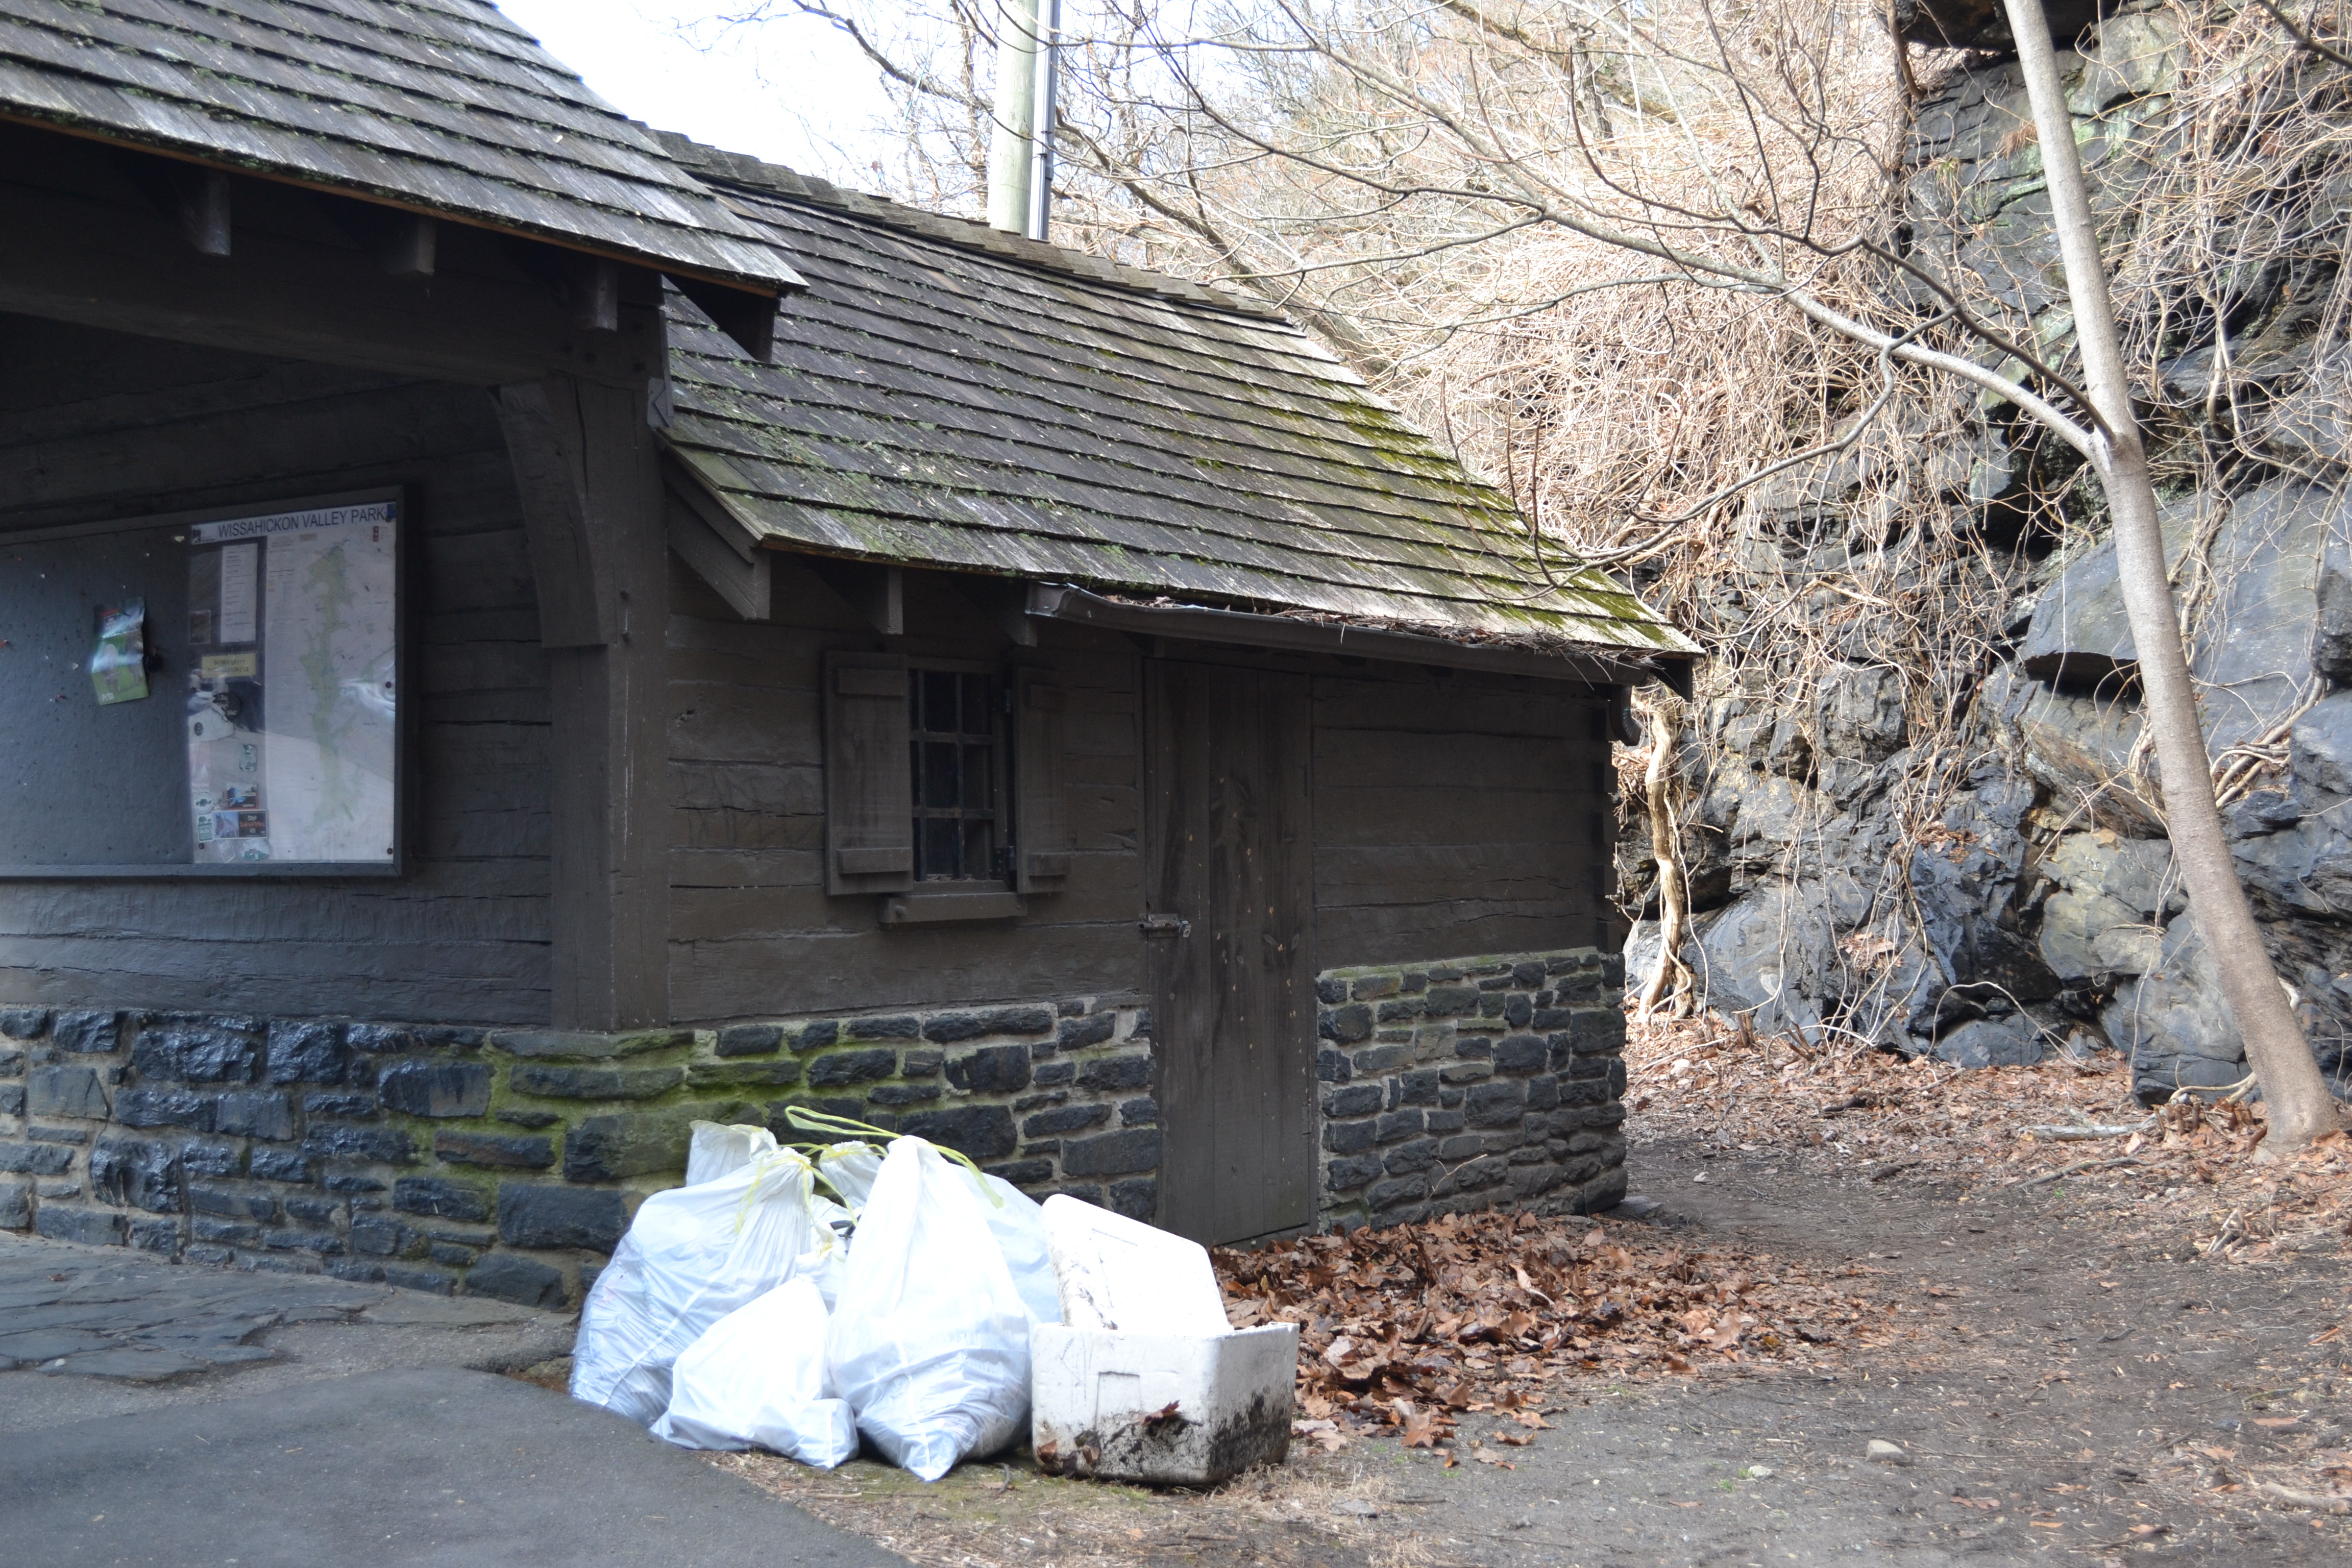 Friends of Wissahickon cleanup